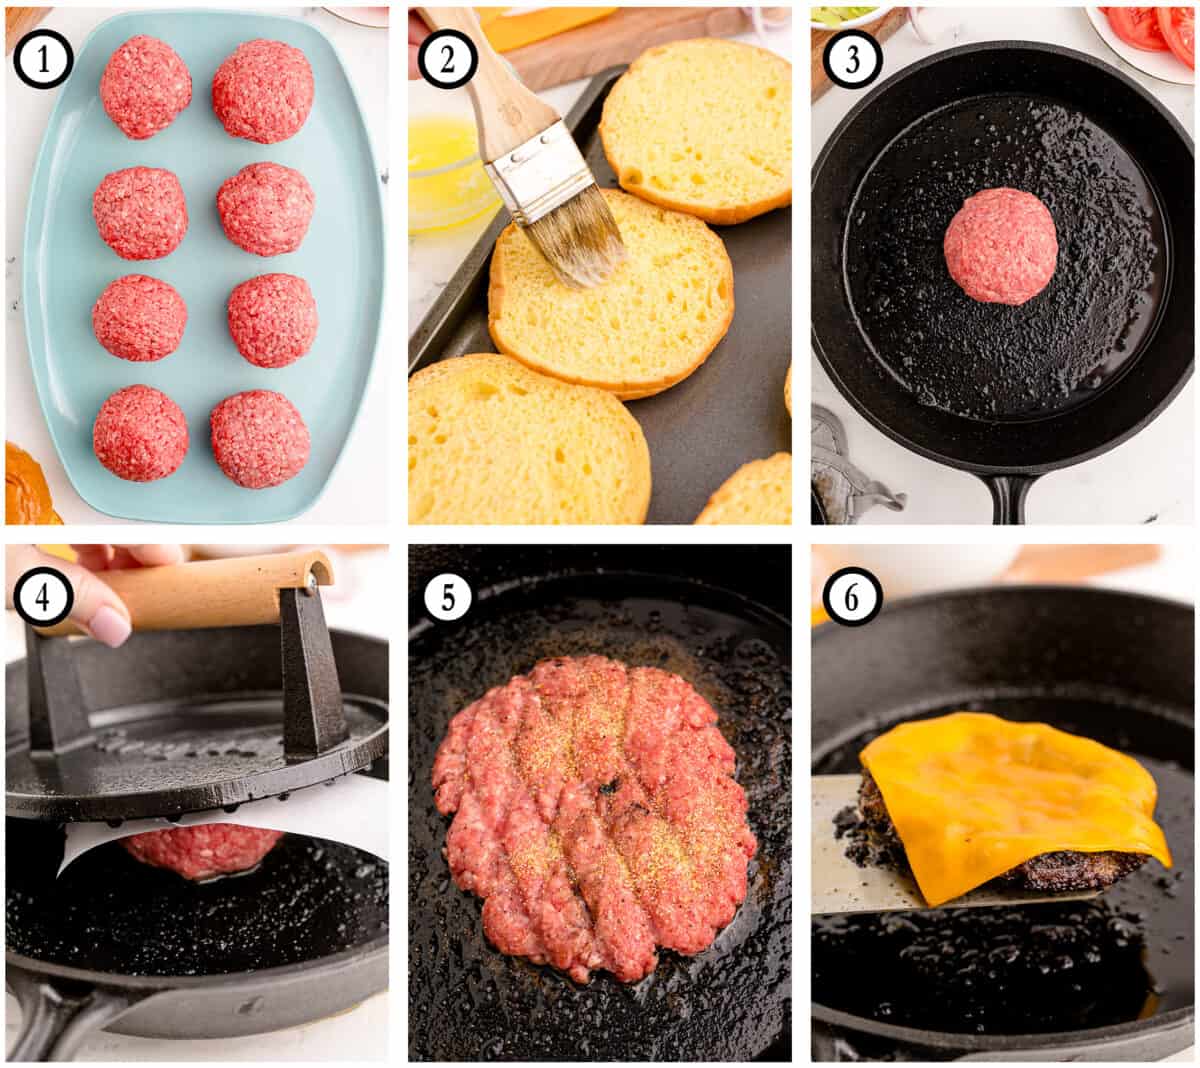 https://www.lovefromtheoven.com/wp-content/uploads/2022/04/how-to-make-smash-burgers-1200x1068.jpg